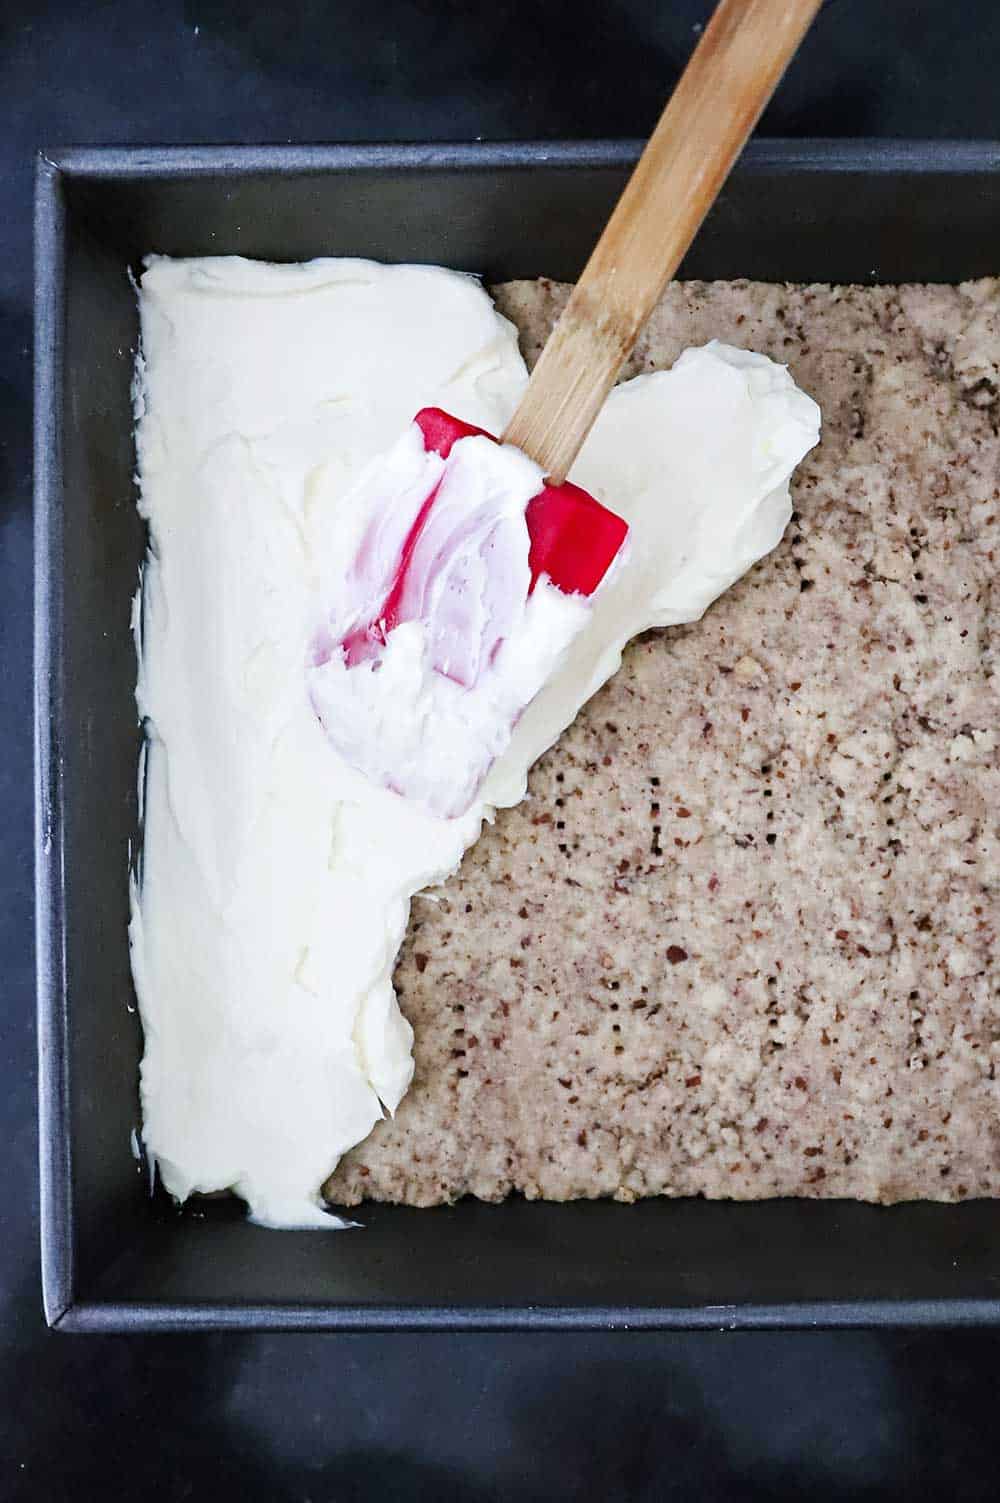 A red spatula being used to spread cream cheese filling over a short bread crust in a metal baking pan.